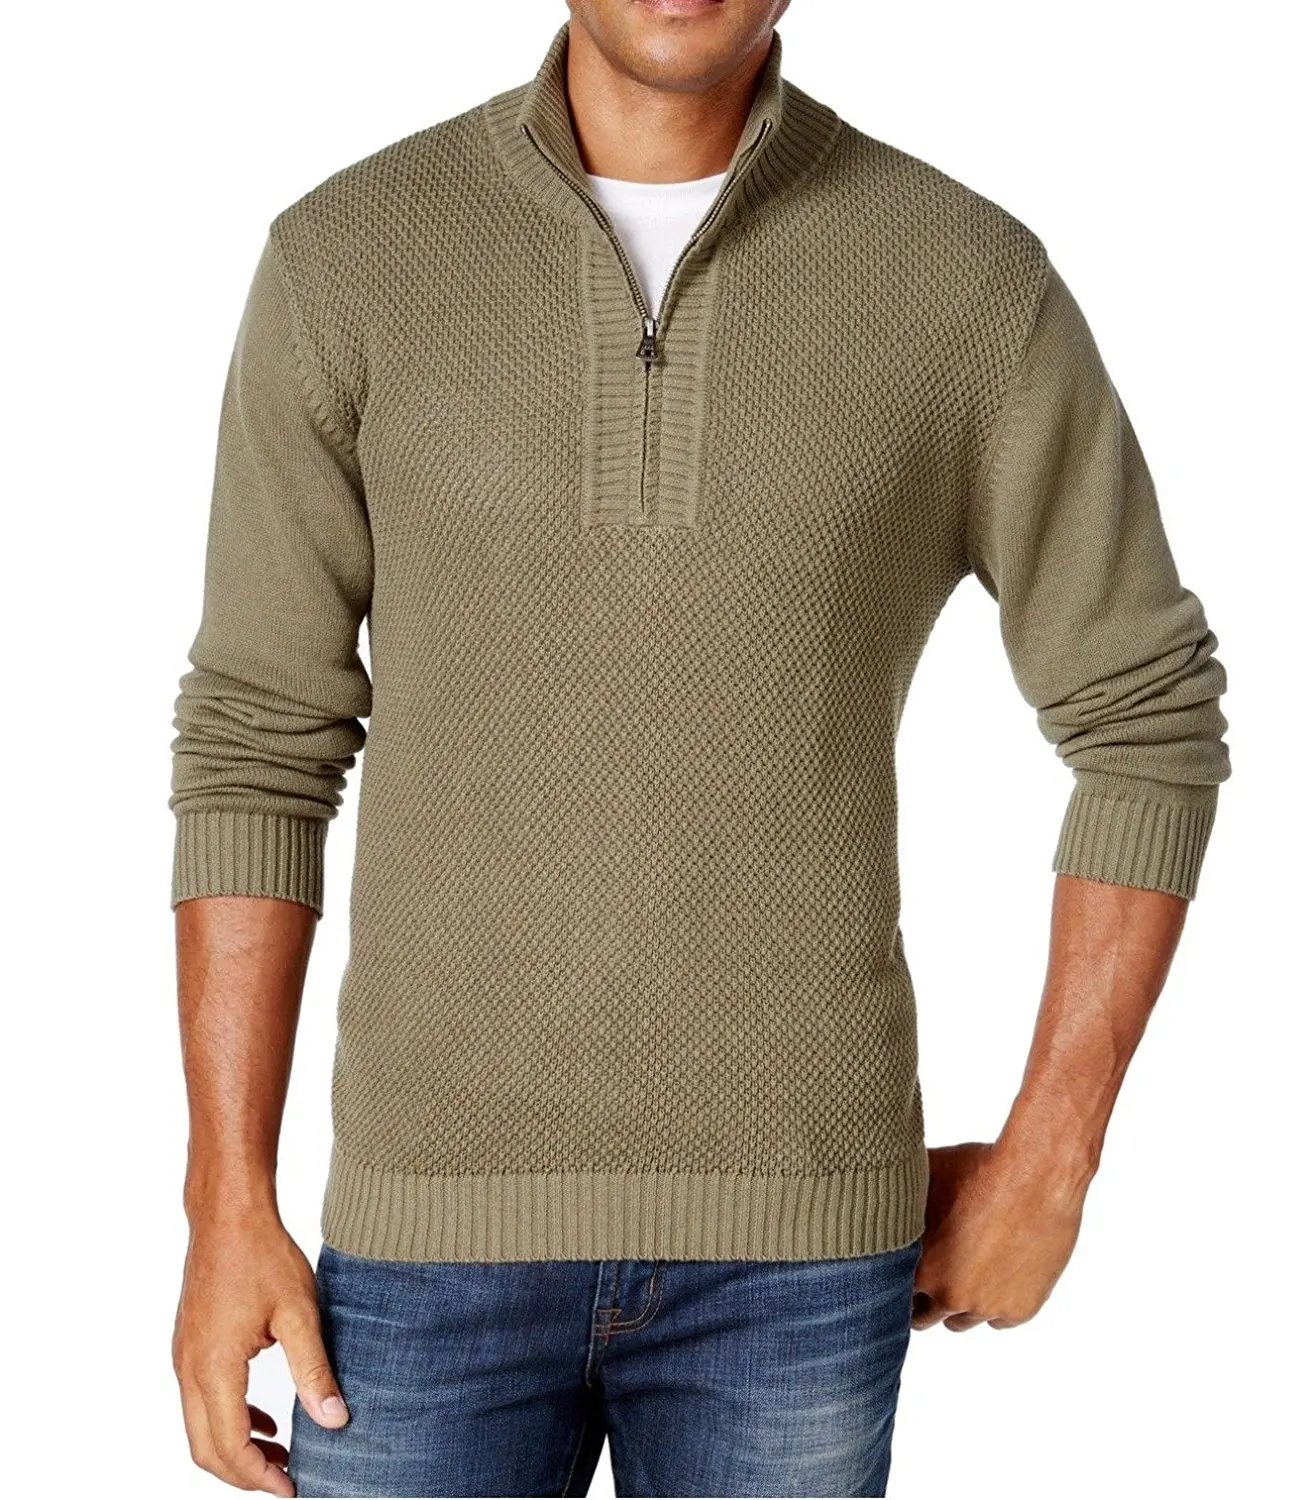 Cheap Olive Green Sweater Men, find Olive Green Sweater Men deals on ...